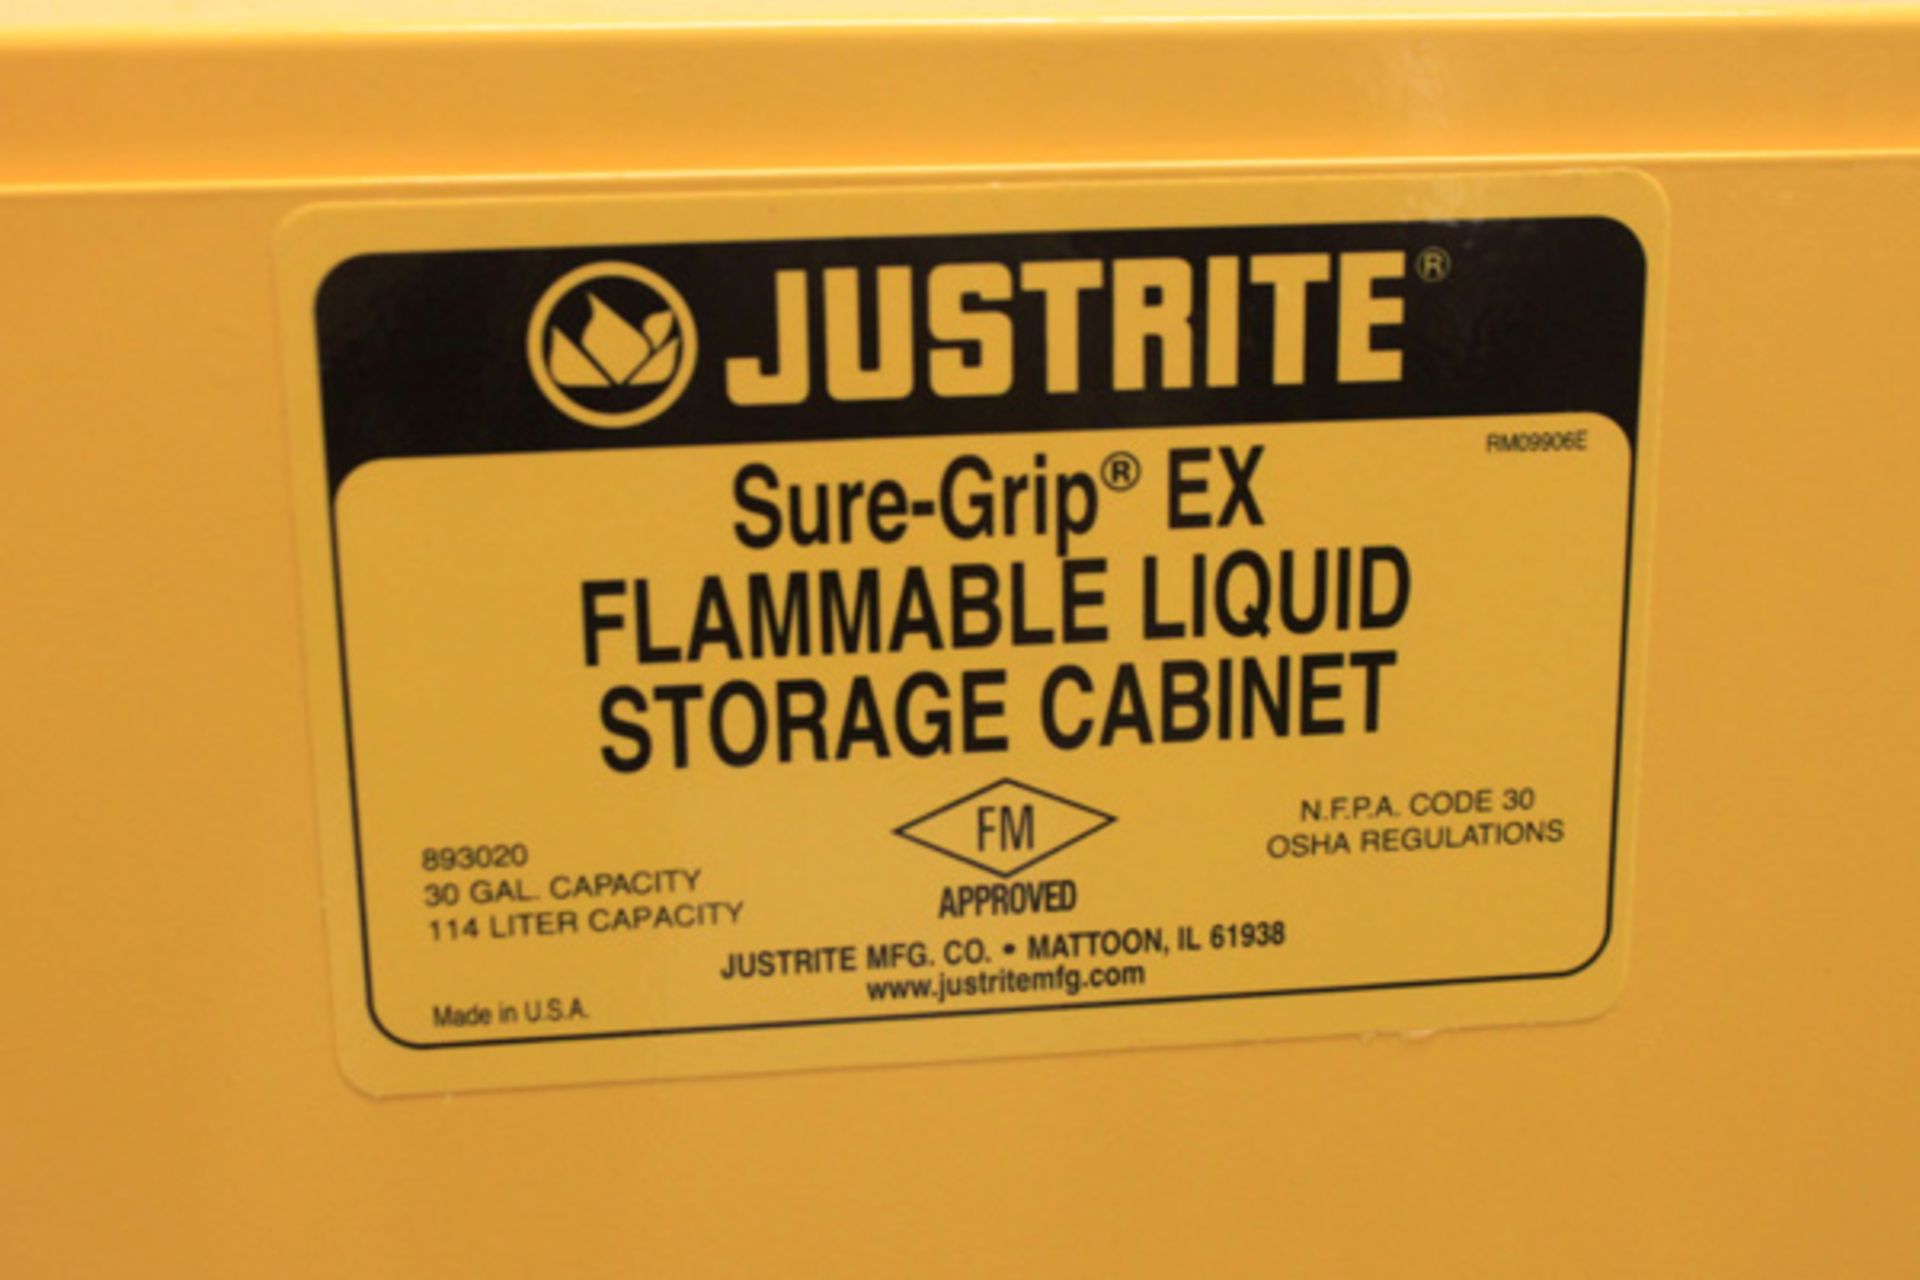 Justrite 30 Gal. Capacity Flammable Liquid Storage Cabinet (43" x 18" D x 44" H), Model 25302 - Image 2 of 2